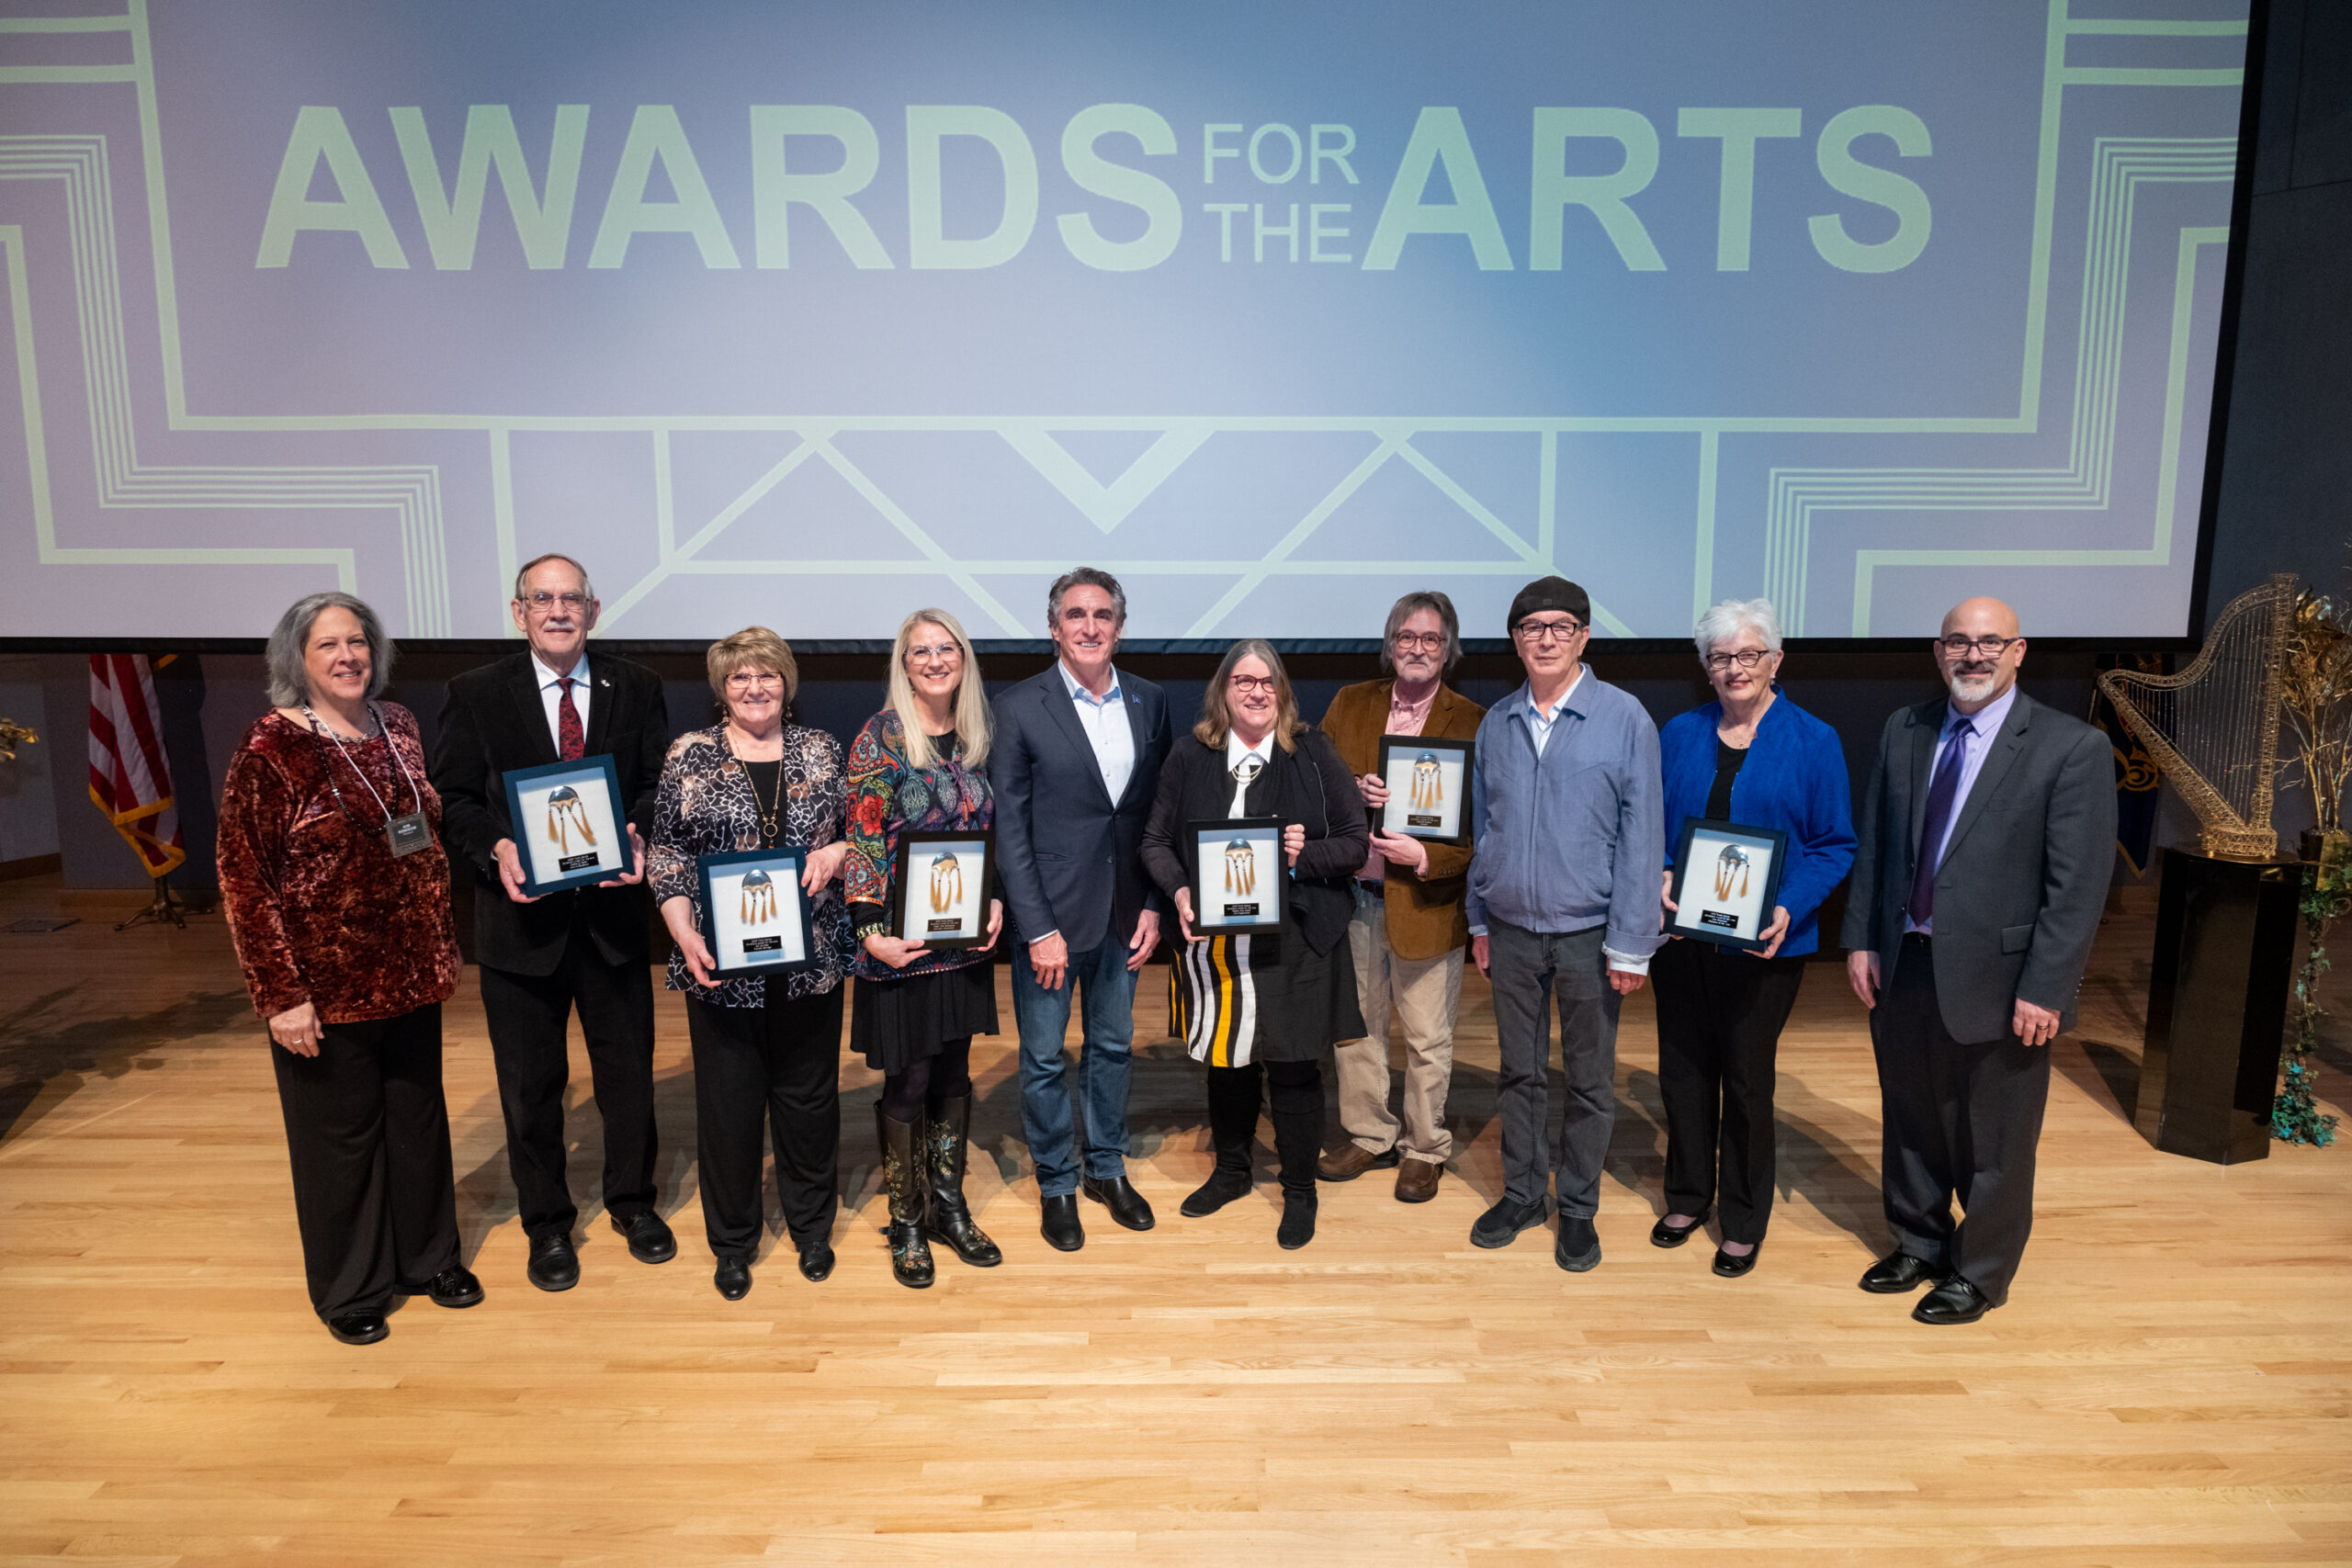 A group of people pose on a stage in front of a sign that says Awards for the Arts